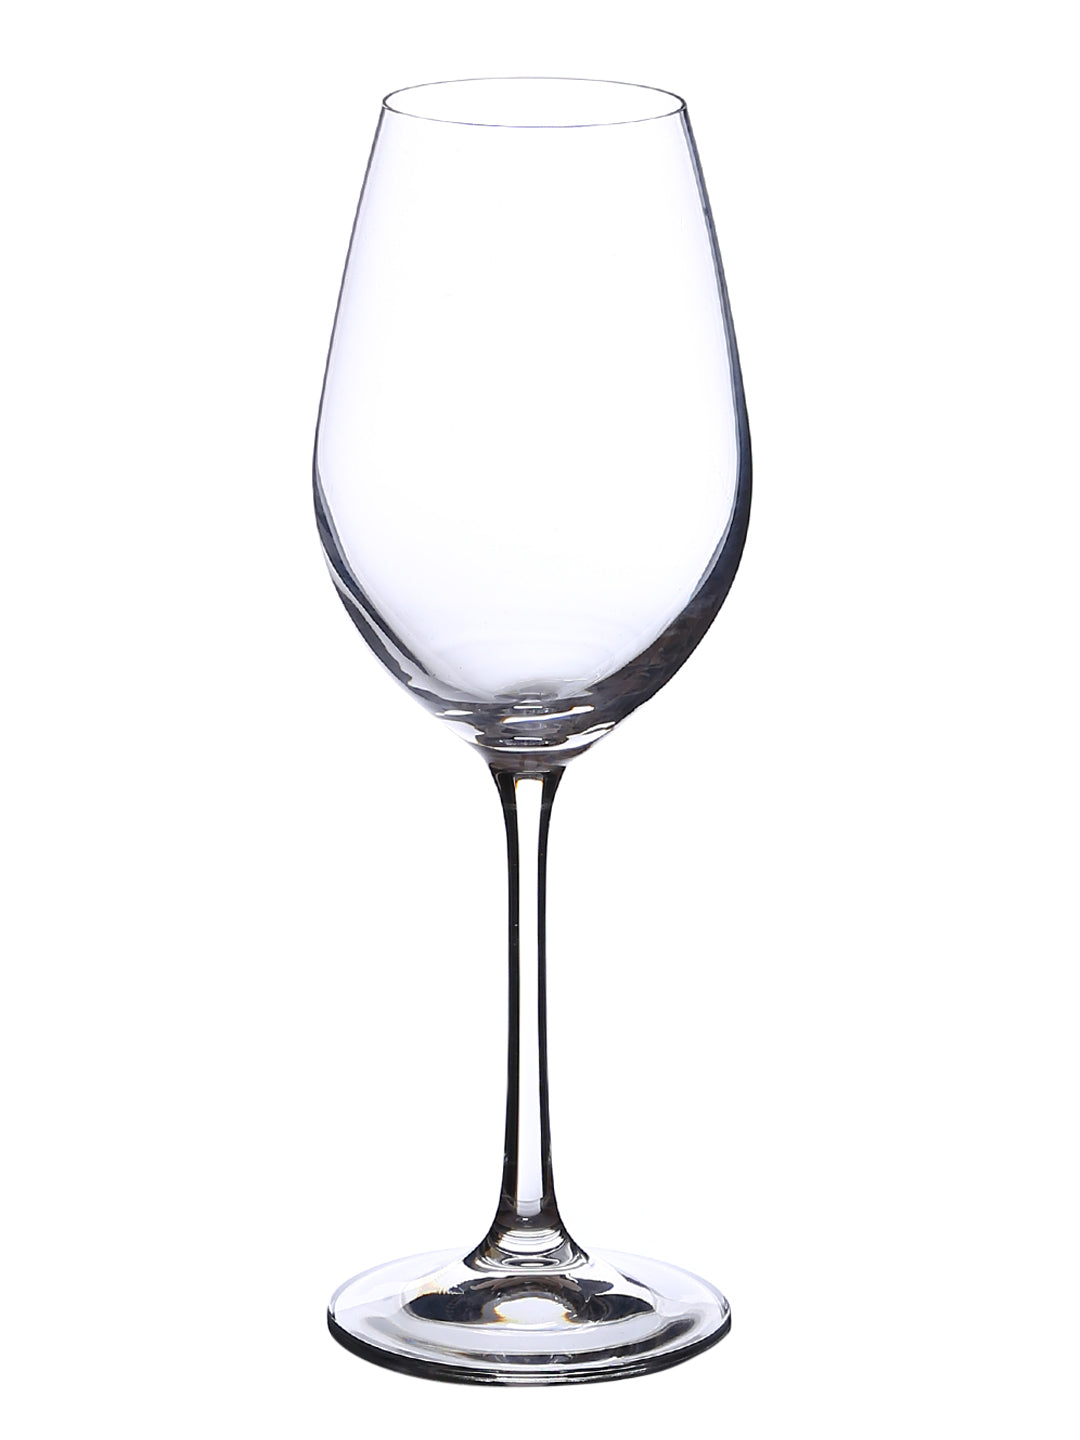 Crystal wine glass perfect for formal gatherings